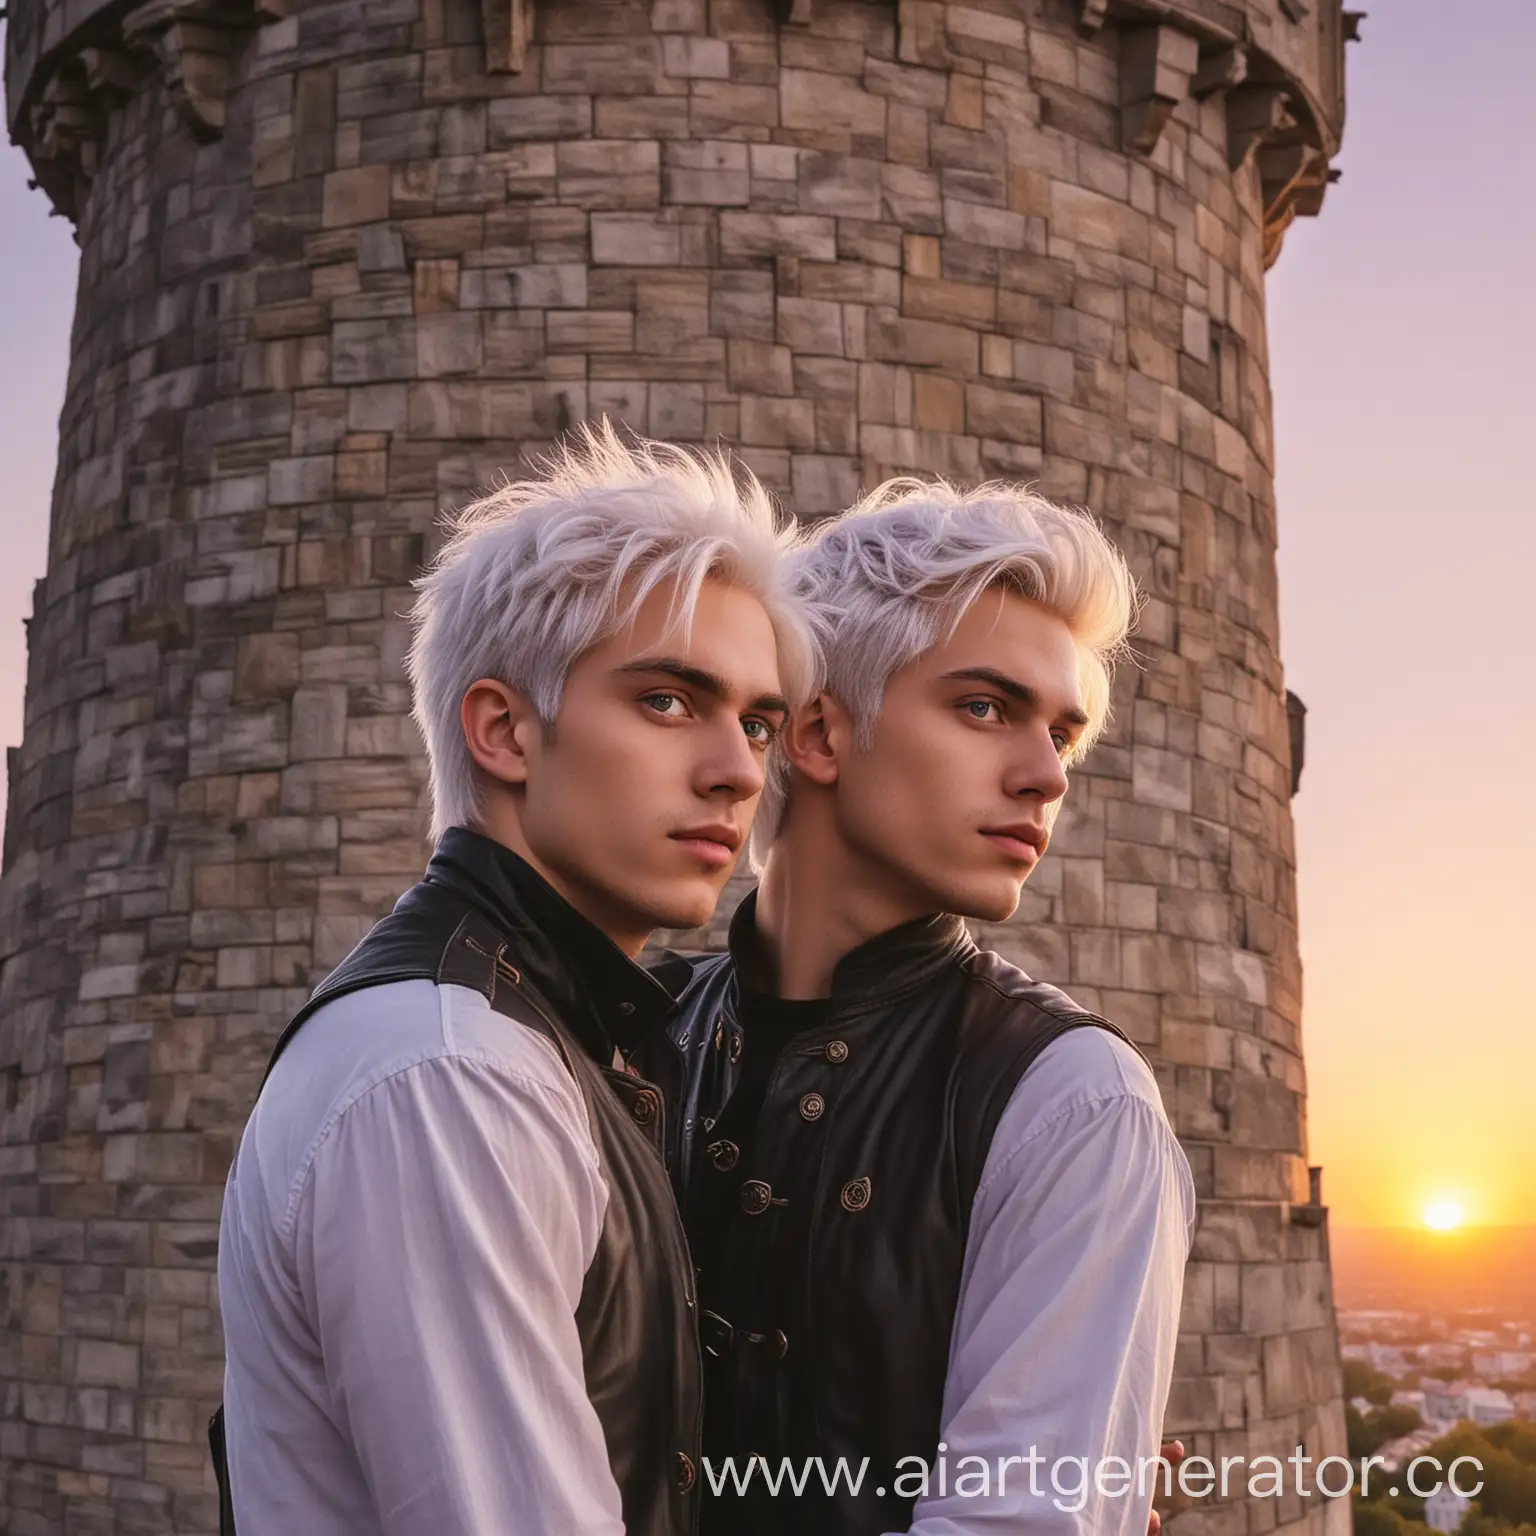 Two-Men-on-Tower-at-Sunset-A-Tale-of-Contrasting-Features